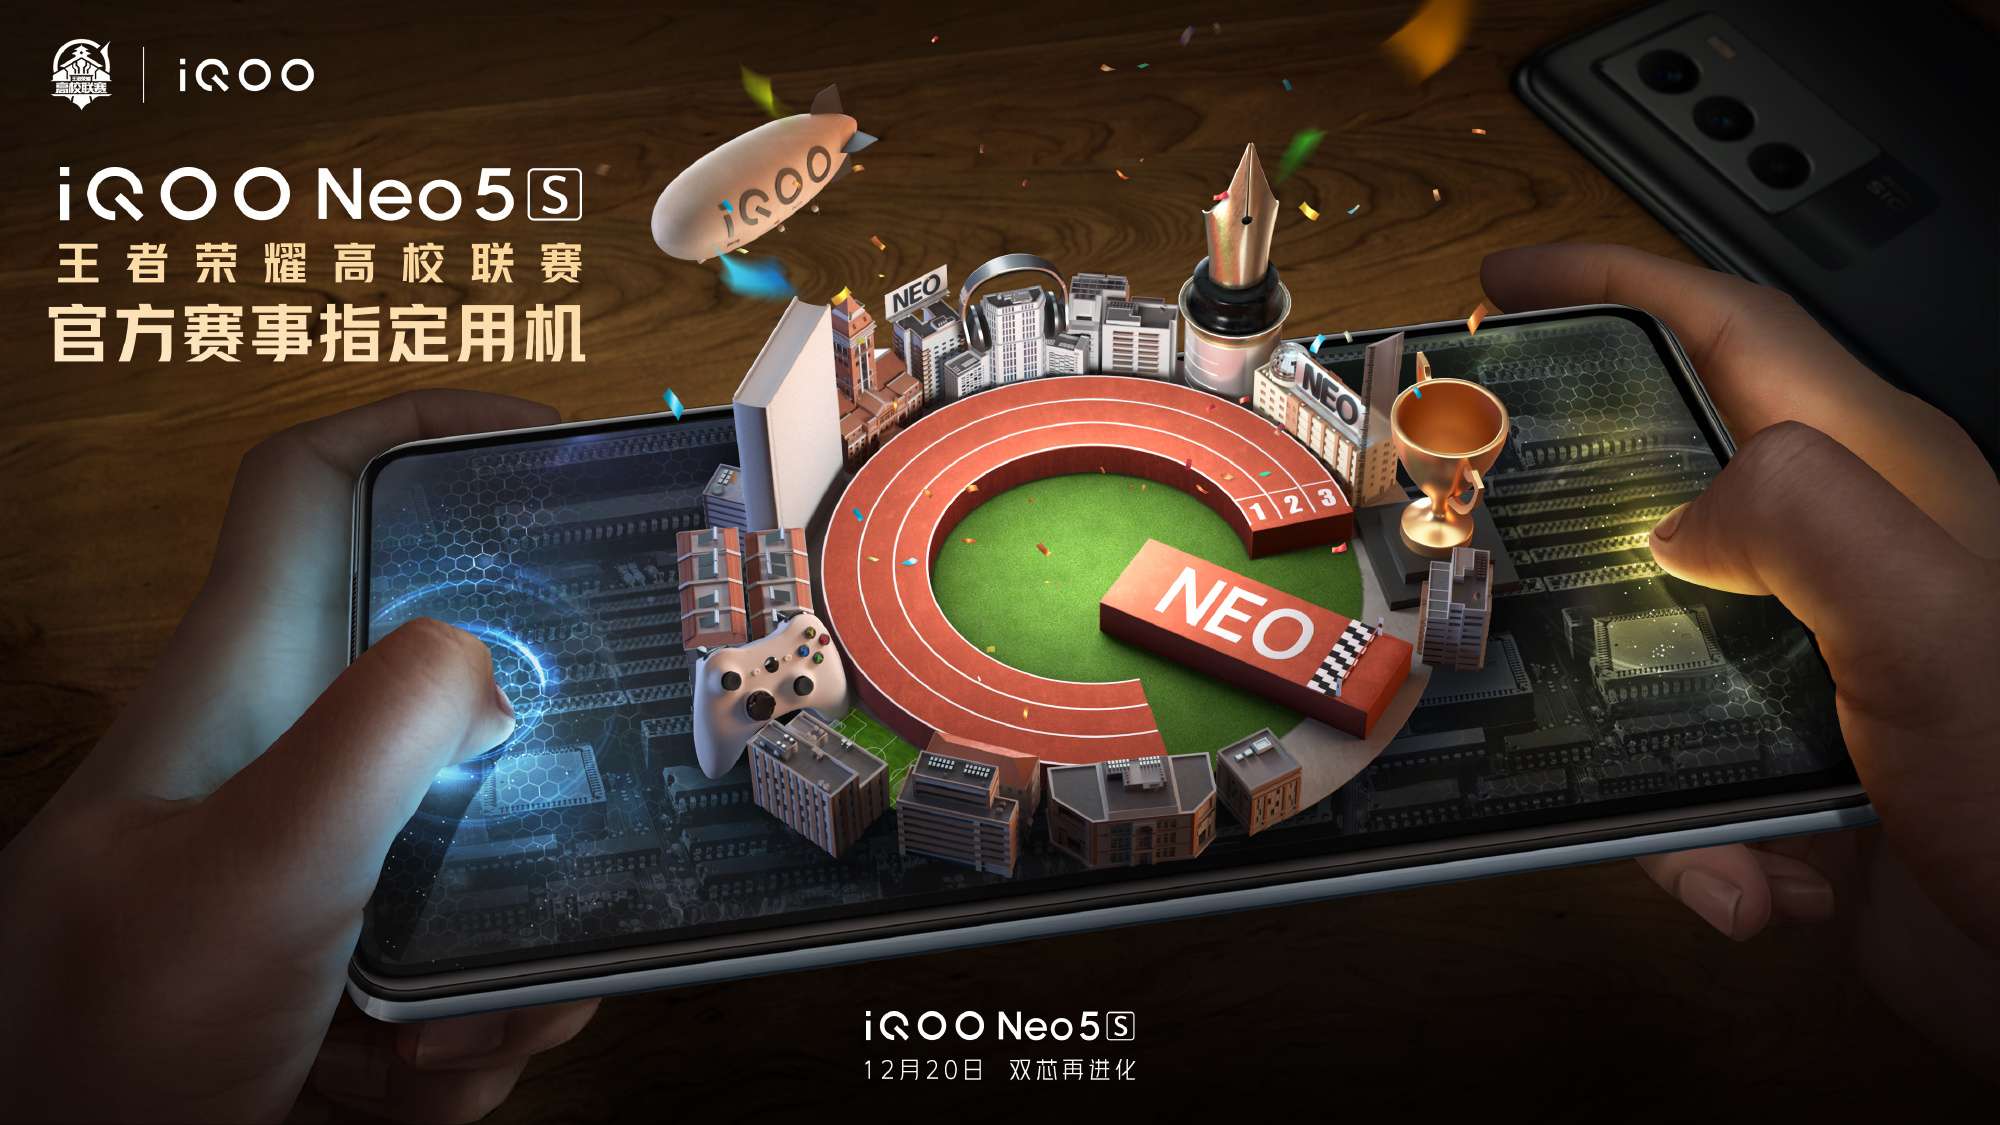 Officially: iQOO Neo 5s with AMOLED screen, Snapdragon 888 chip and 66W fast charging will be presented on December 20